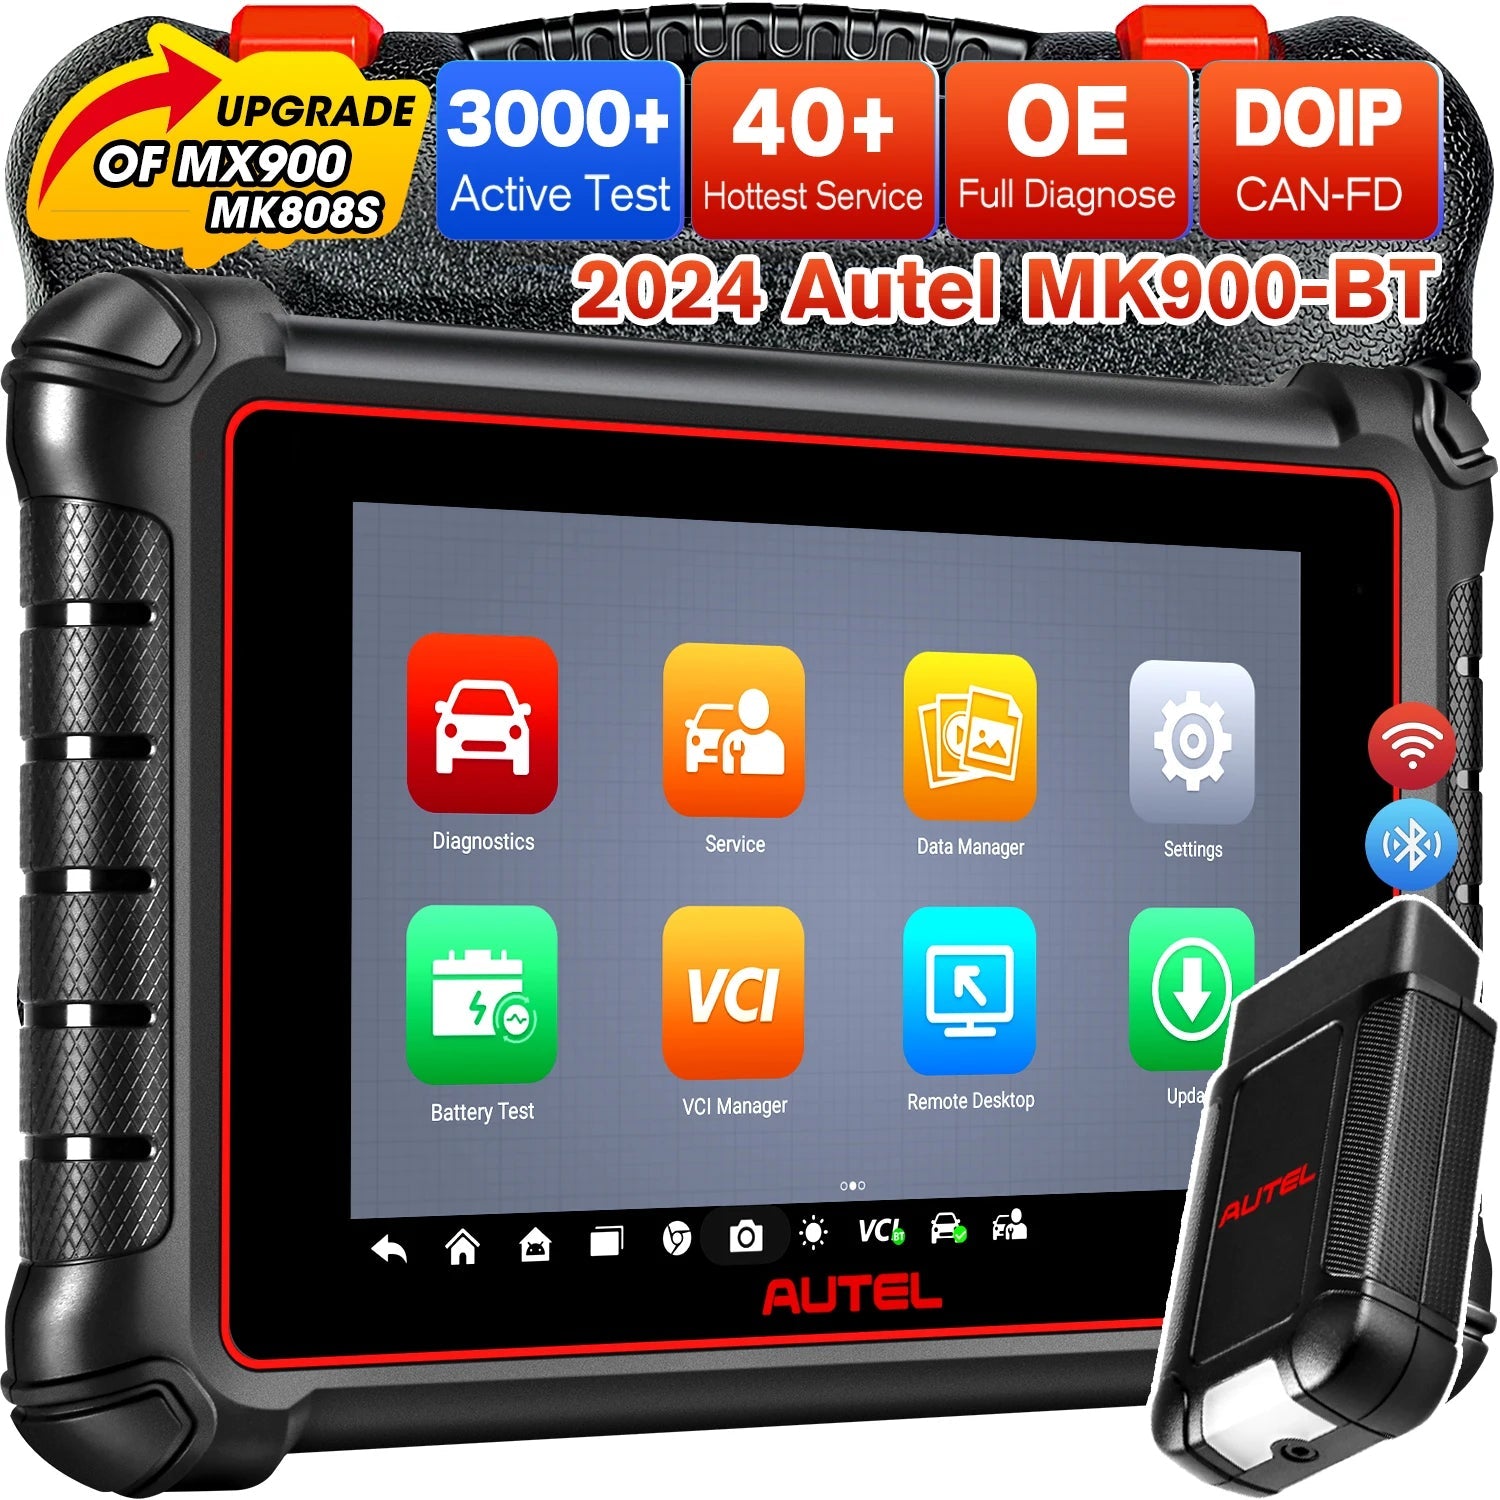 Autel MaxiCOM MK900BT Bidirectional Diagnostic Tool, Active Test, 40+ Service with CAN FD/ DOIP, Upgrade of MK808BT PRO/ MK808S - Dynamex